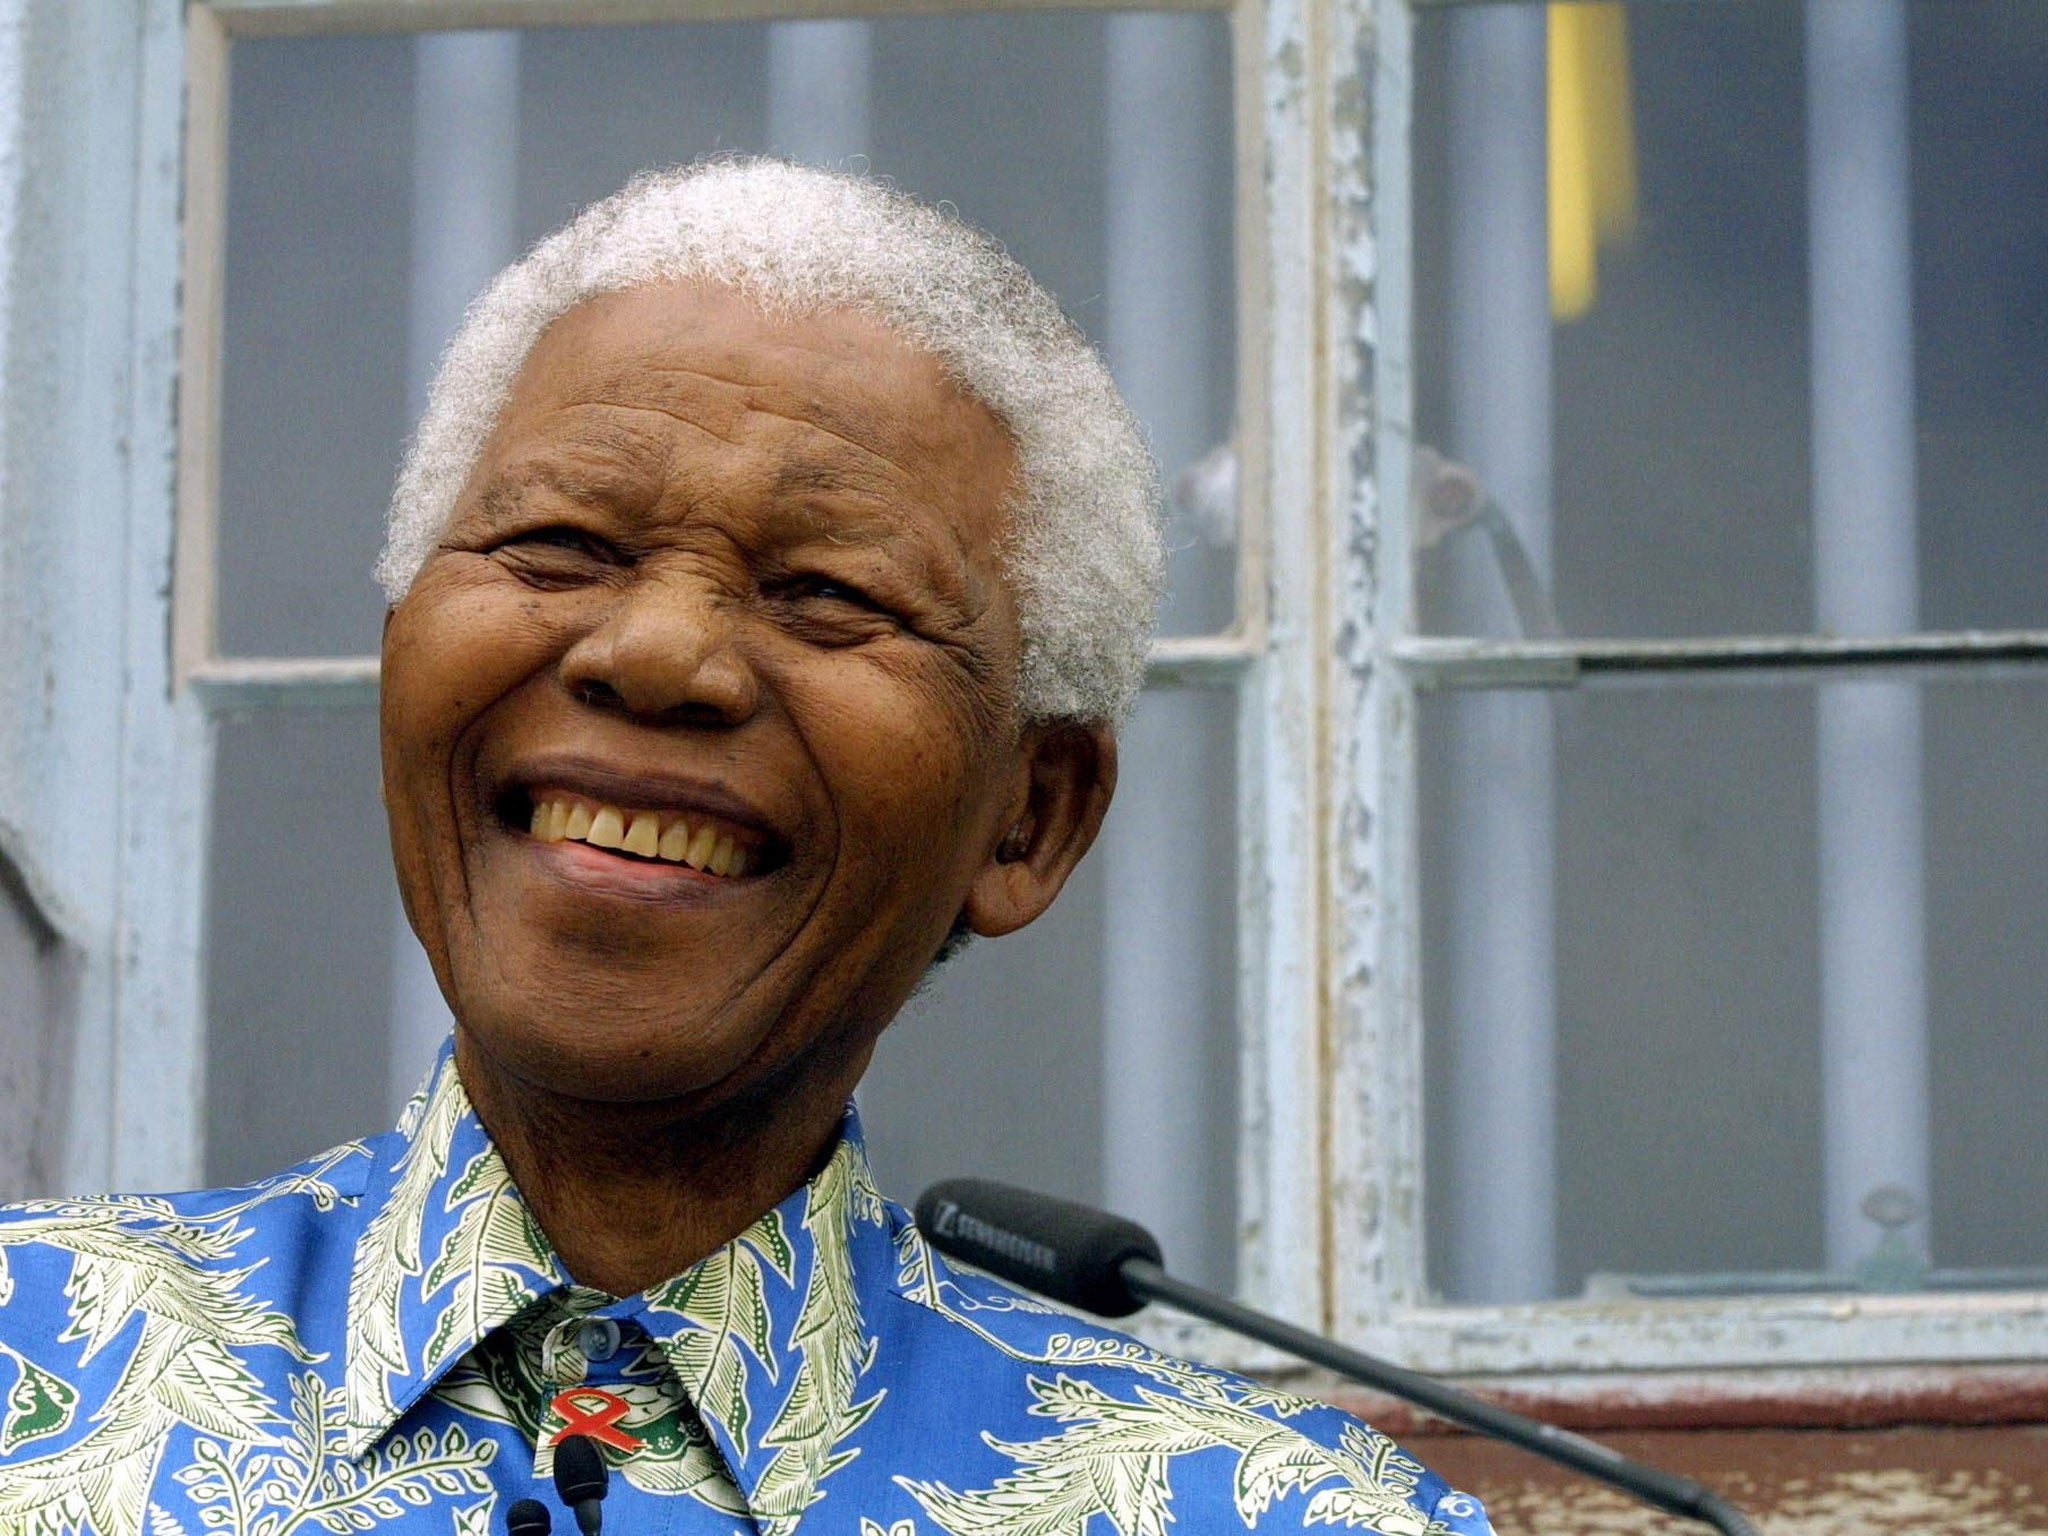 Mandela is being treated at a hospital in Pretoria